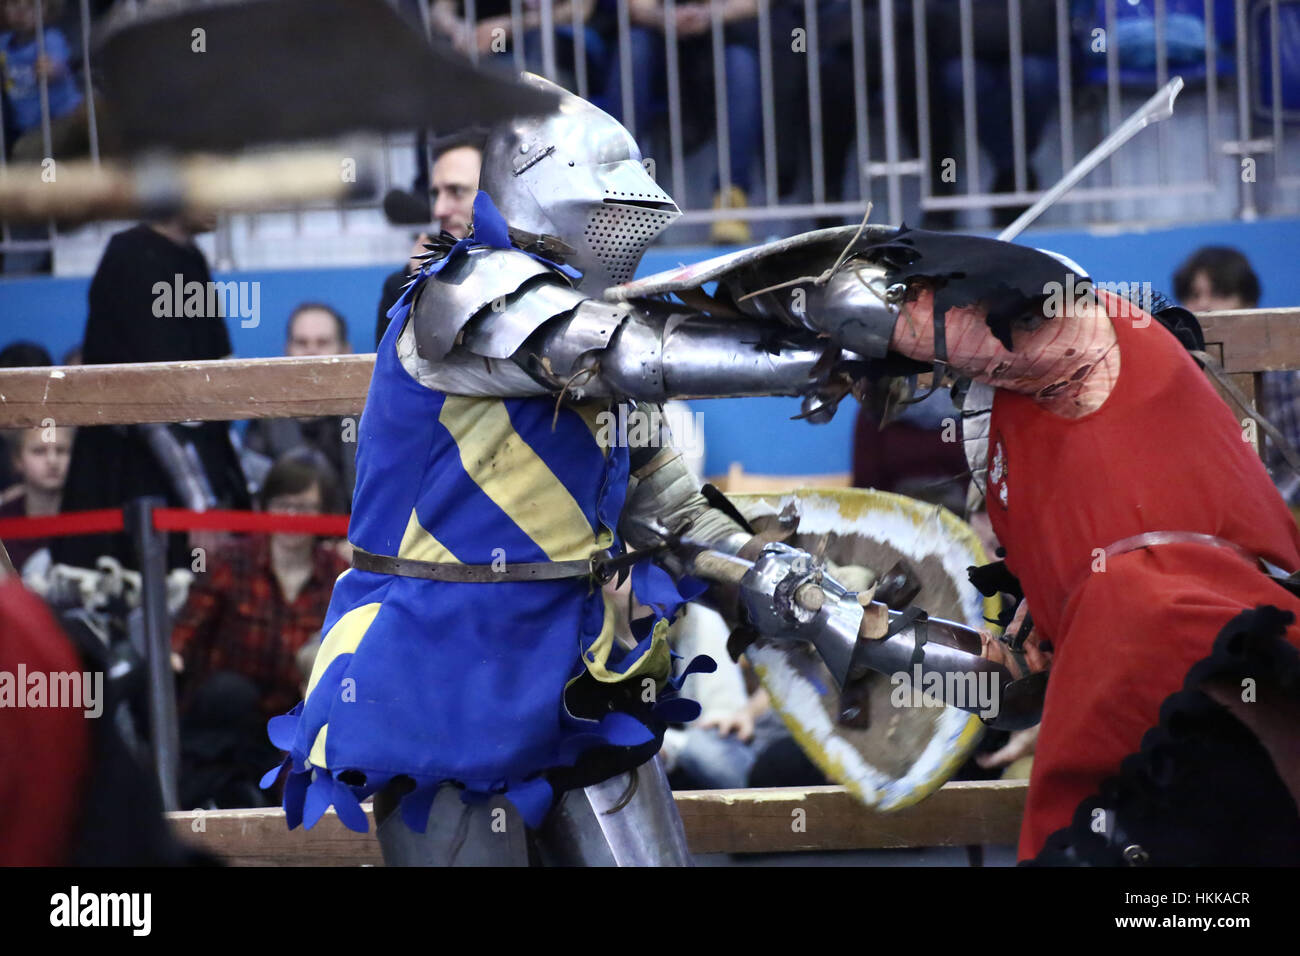 Poland, Warsaw, 28th January 2017: The 3rd Tournament of the Polish League of Fighting Knights was held in Warsaw-Bielany. Several knight groups took part in armoured and medieval weapons fight competiton. Some competitors suffered severe injuries after martial struggles. ©Jake Ratz/Alamy Live News Stock Photo